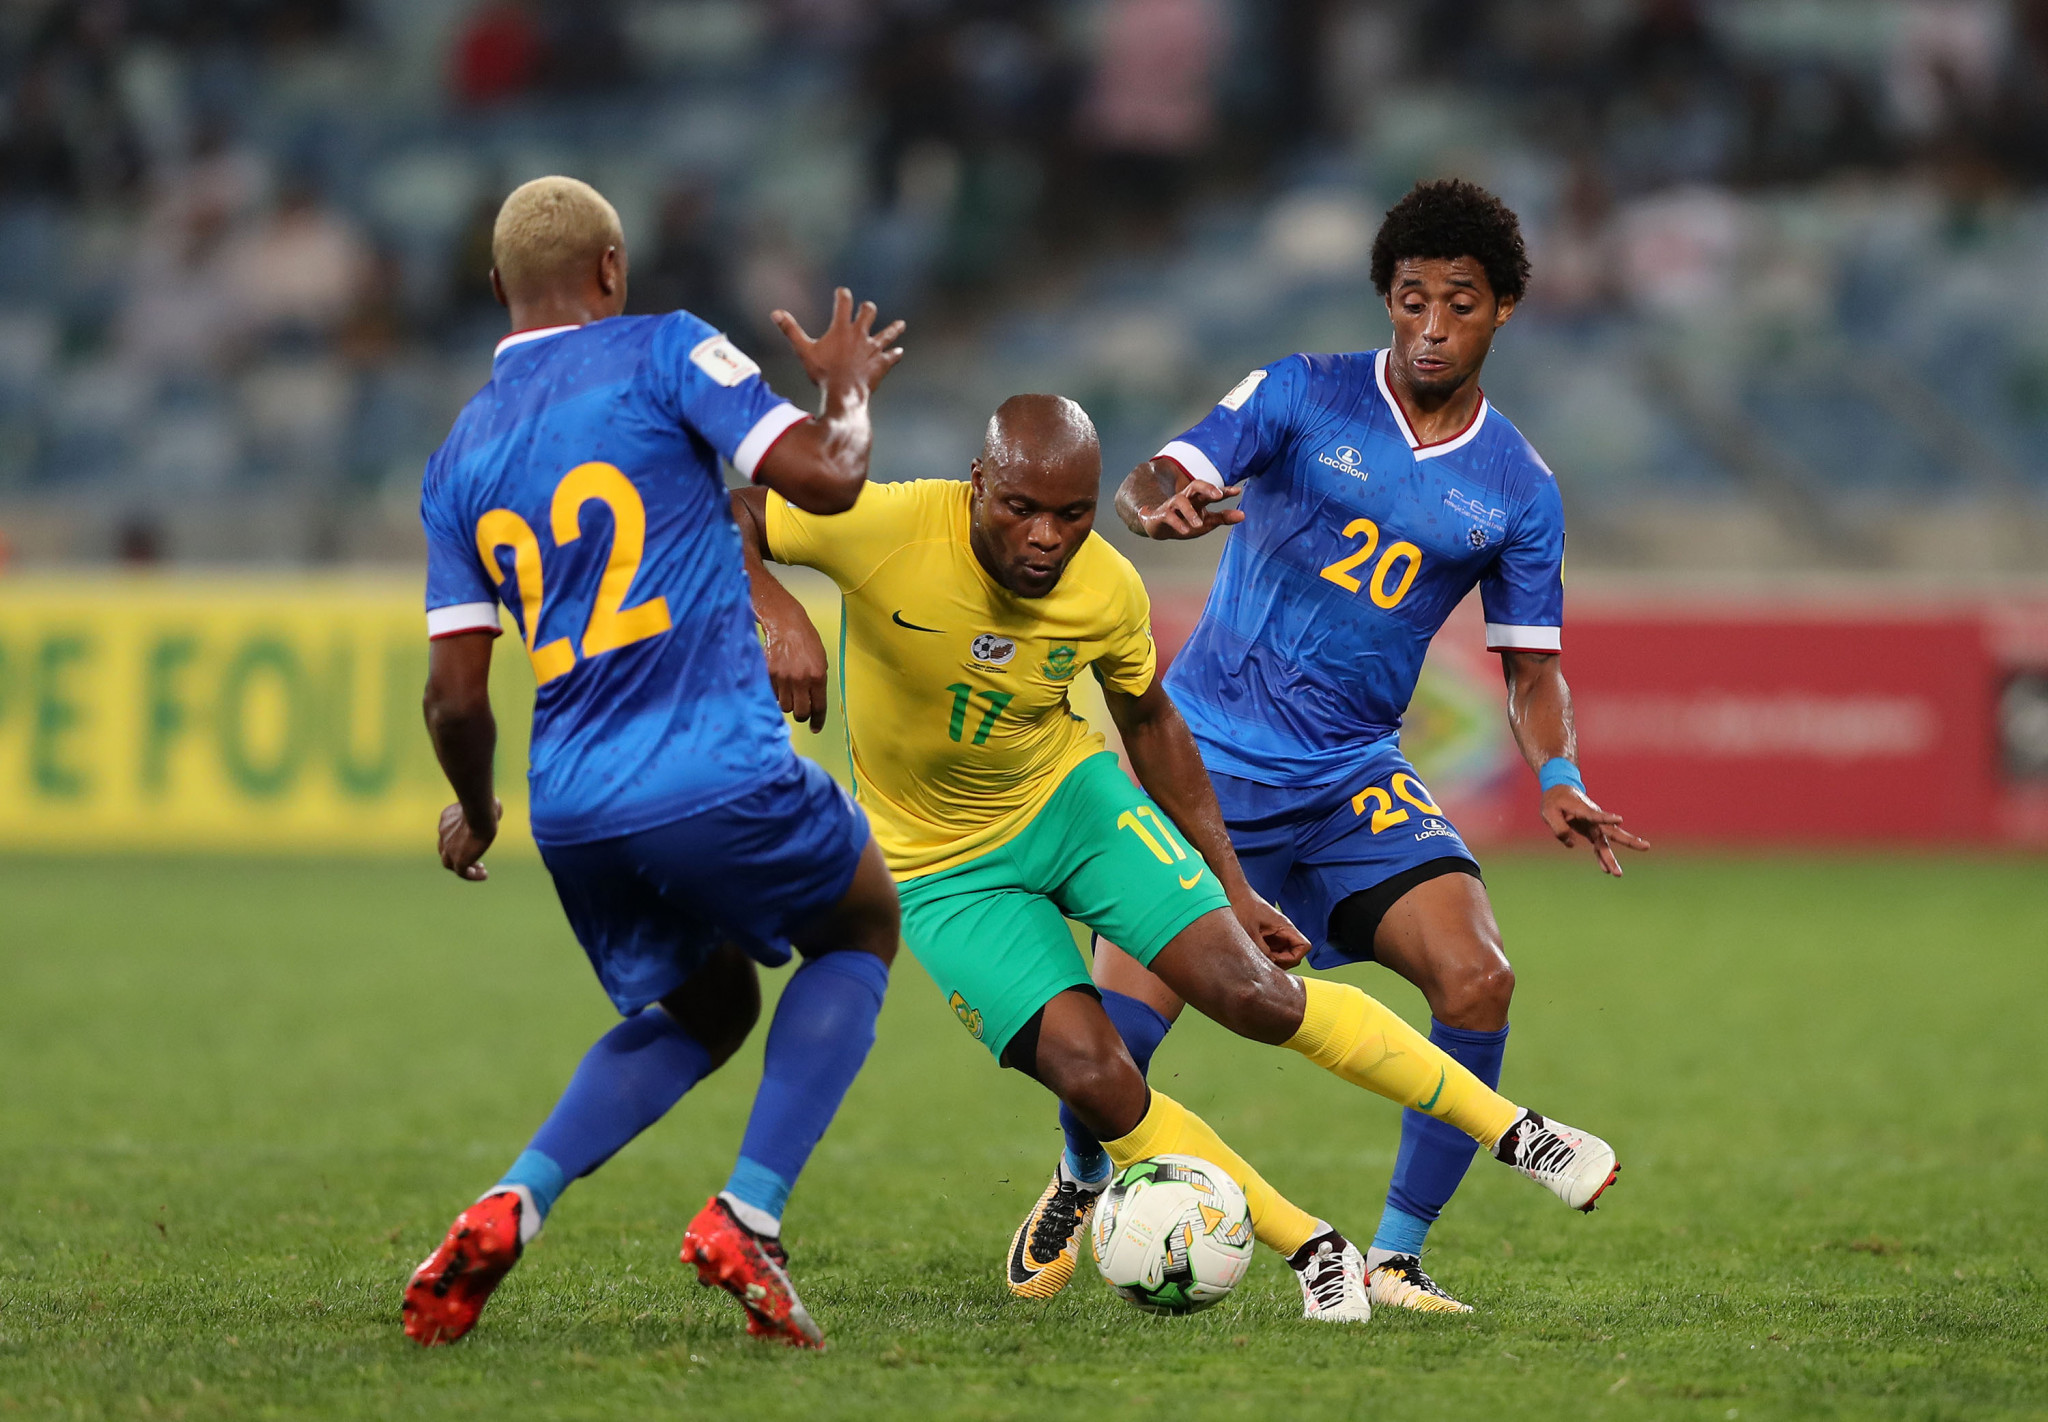 Egypt and South Africa named as contenders to step in as 2019 Africa Cup of Nations hosts